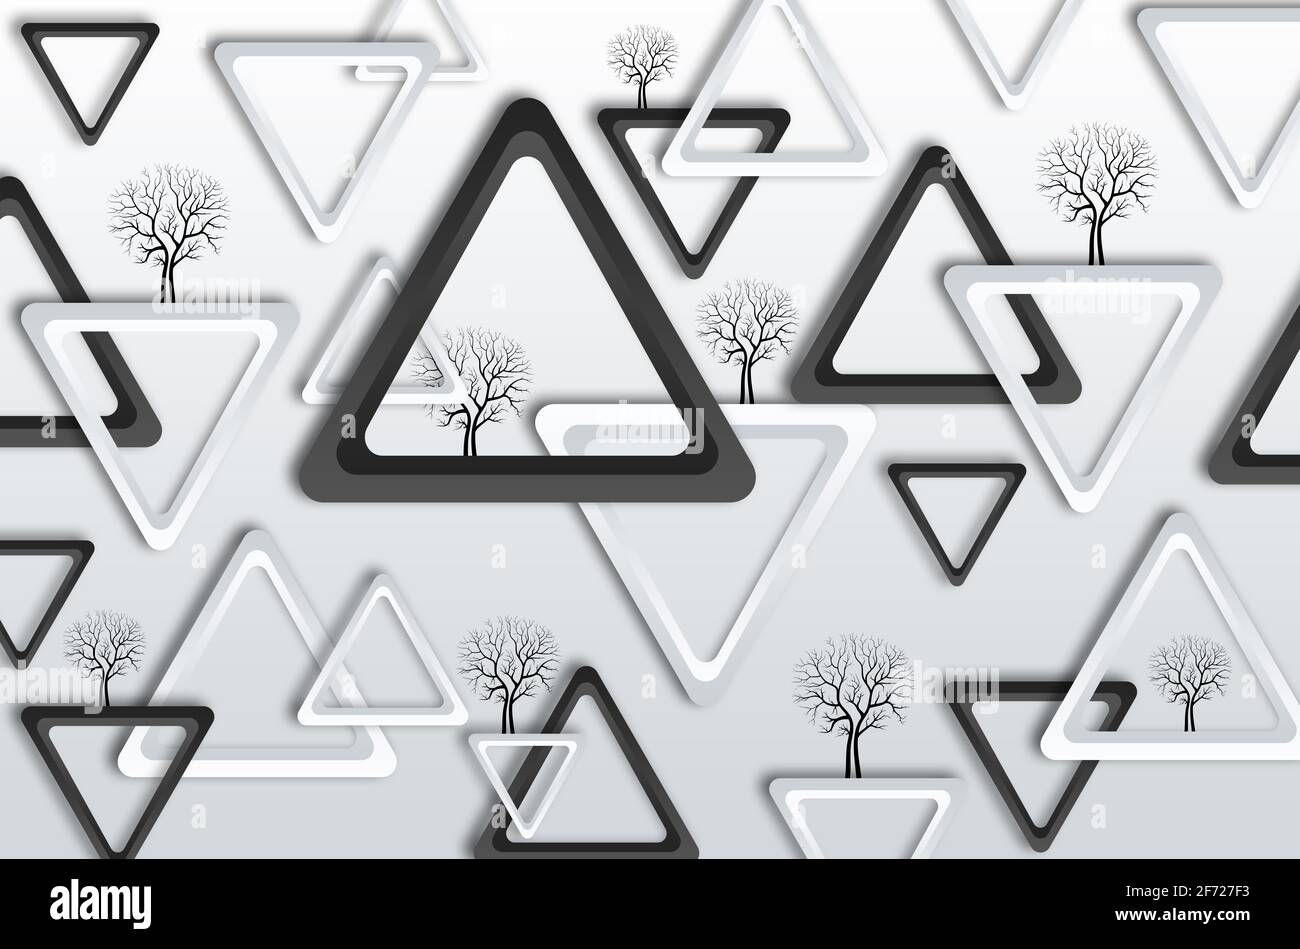 Black And White 3d Mural Wallpaper Image Num 99